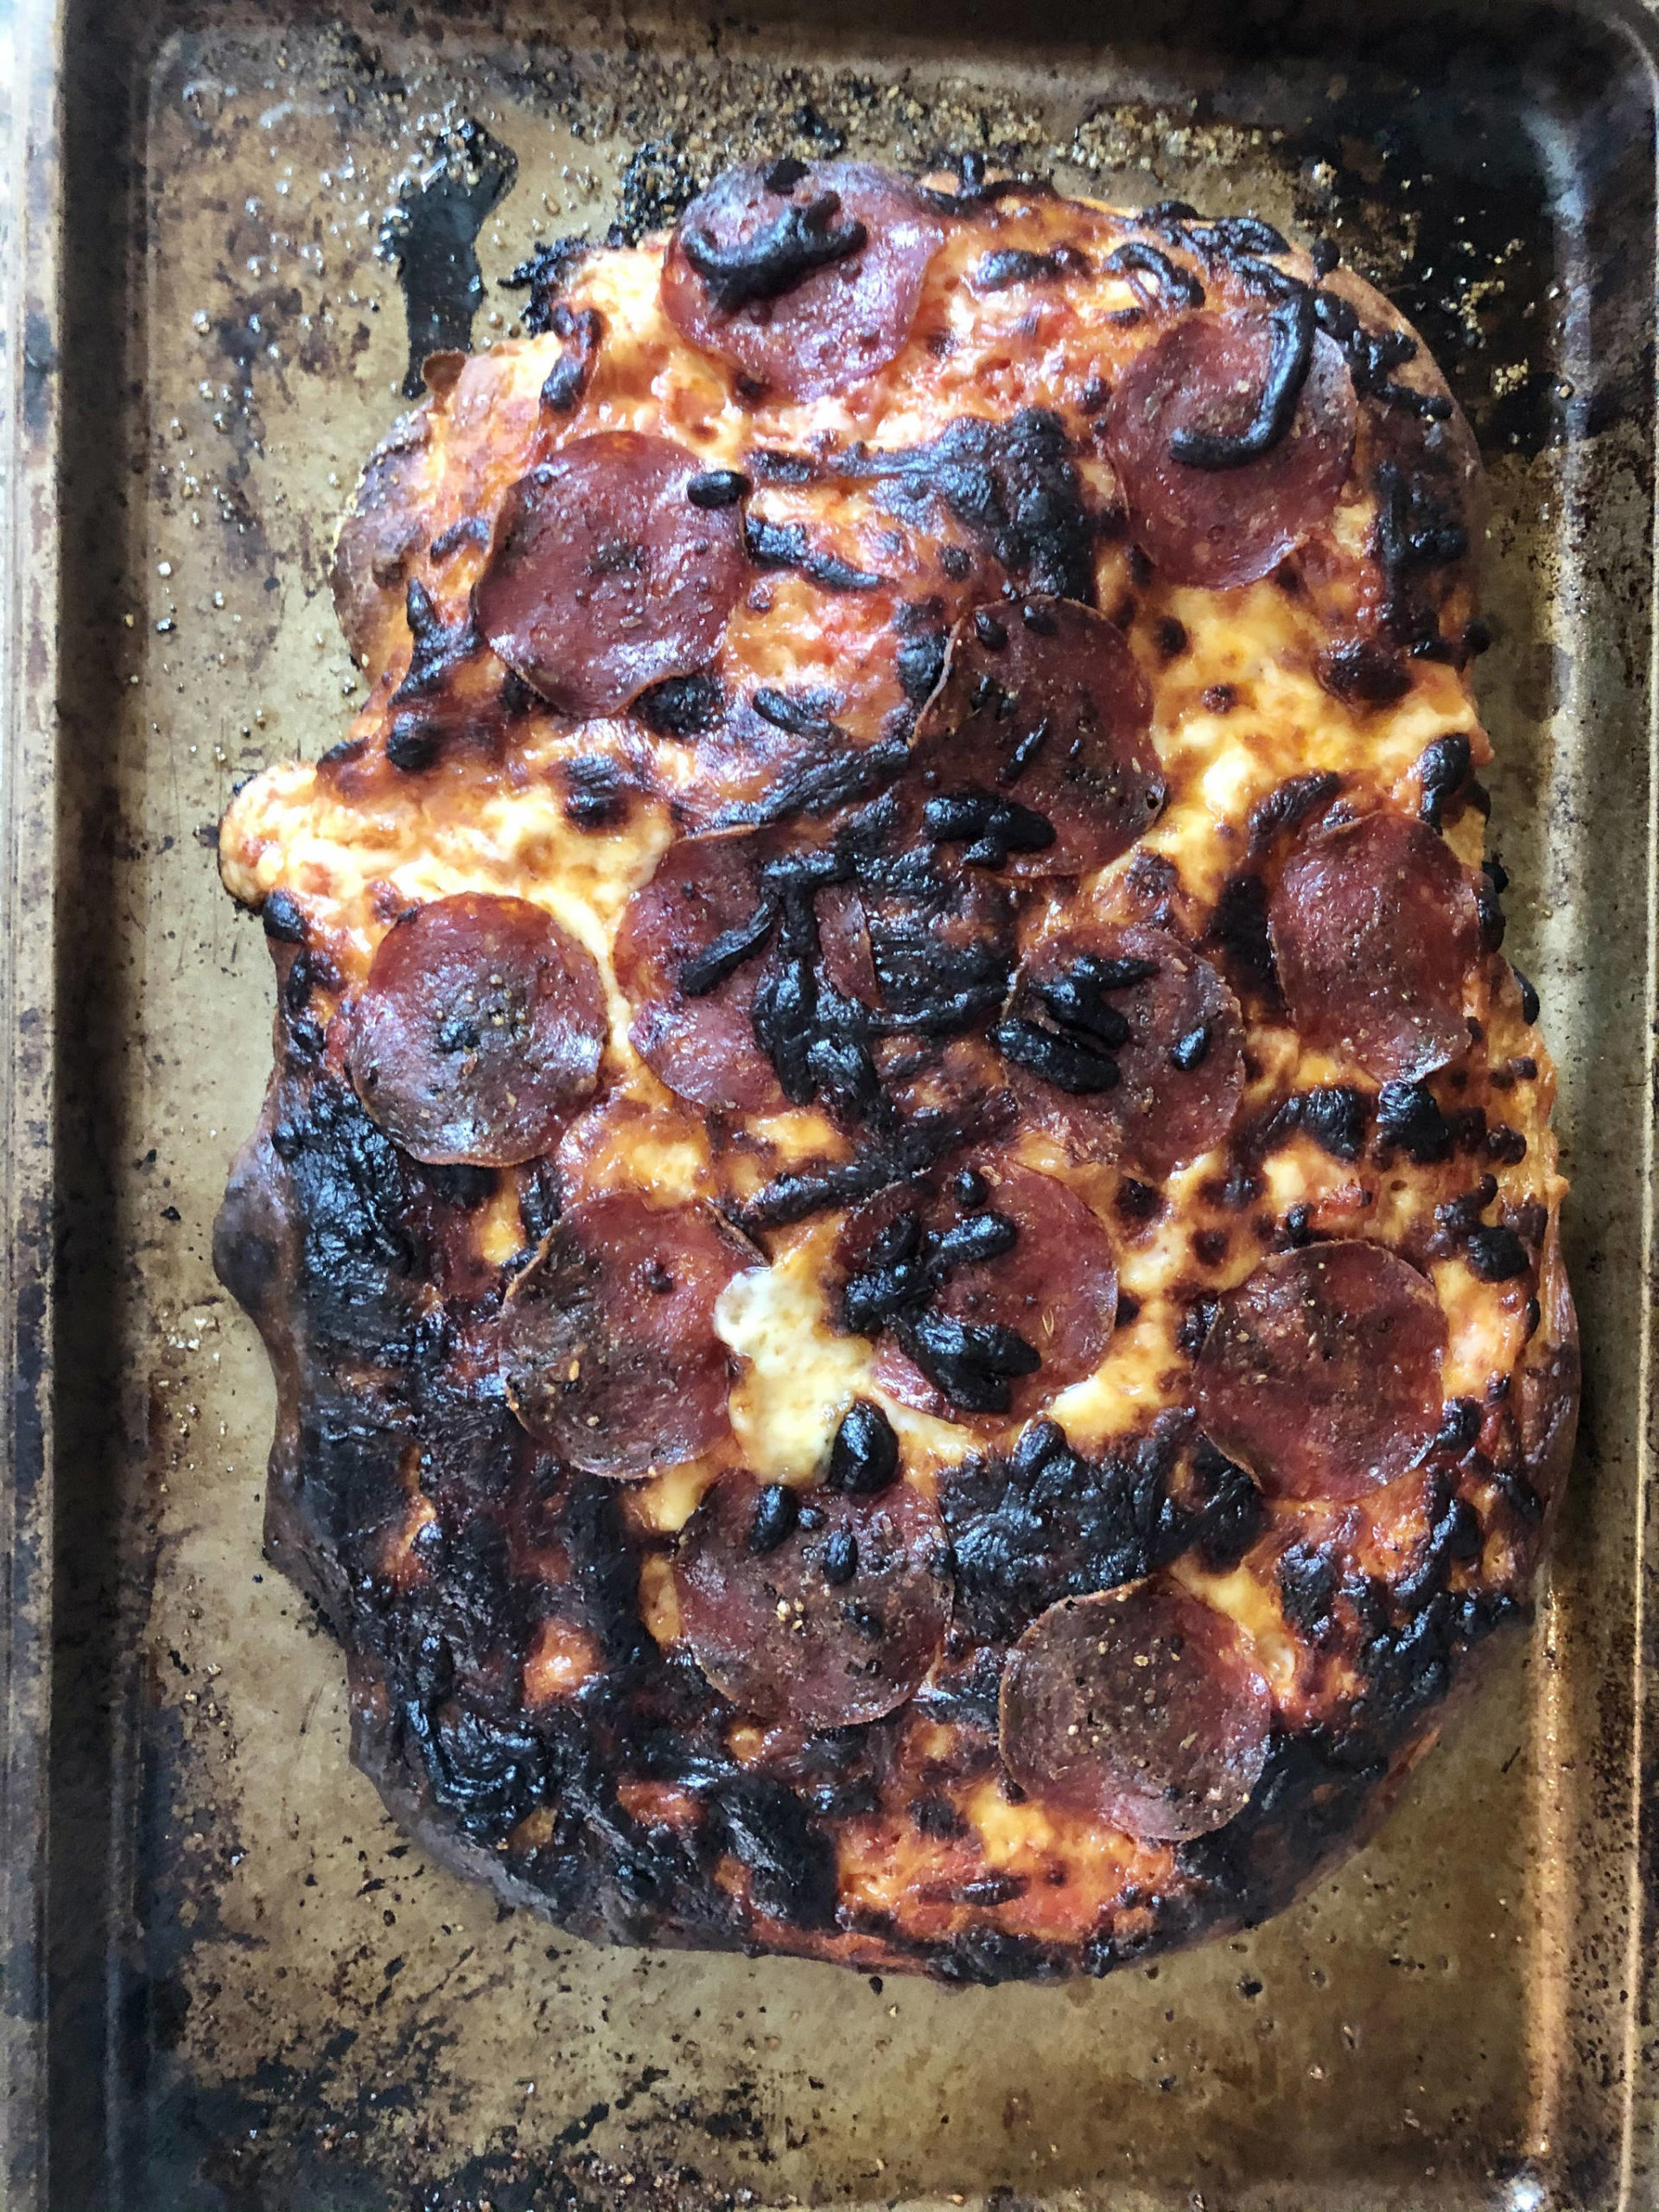 She’s burnt, but she’s beautiful and tastes great, on Monday, Nov. 2, 2020, in Anchorage, Alaska. (Photo by Victoria Petersen/Peninsula Clarion)